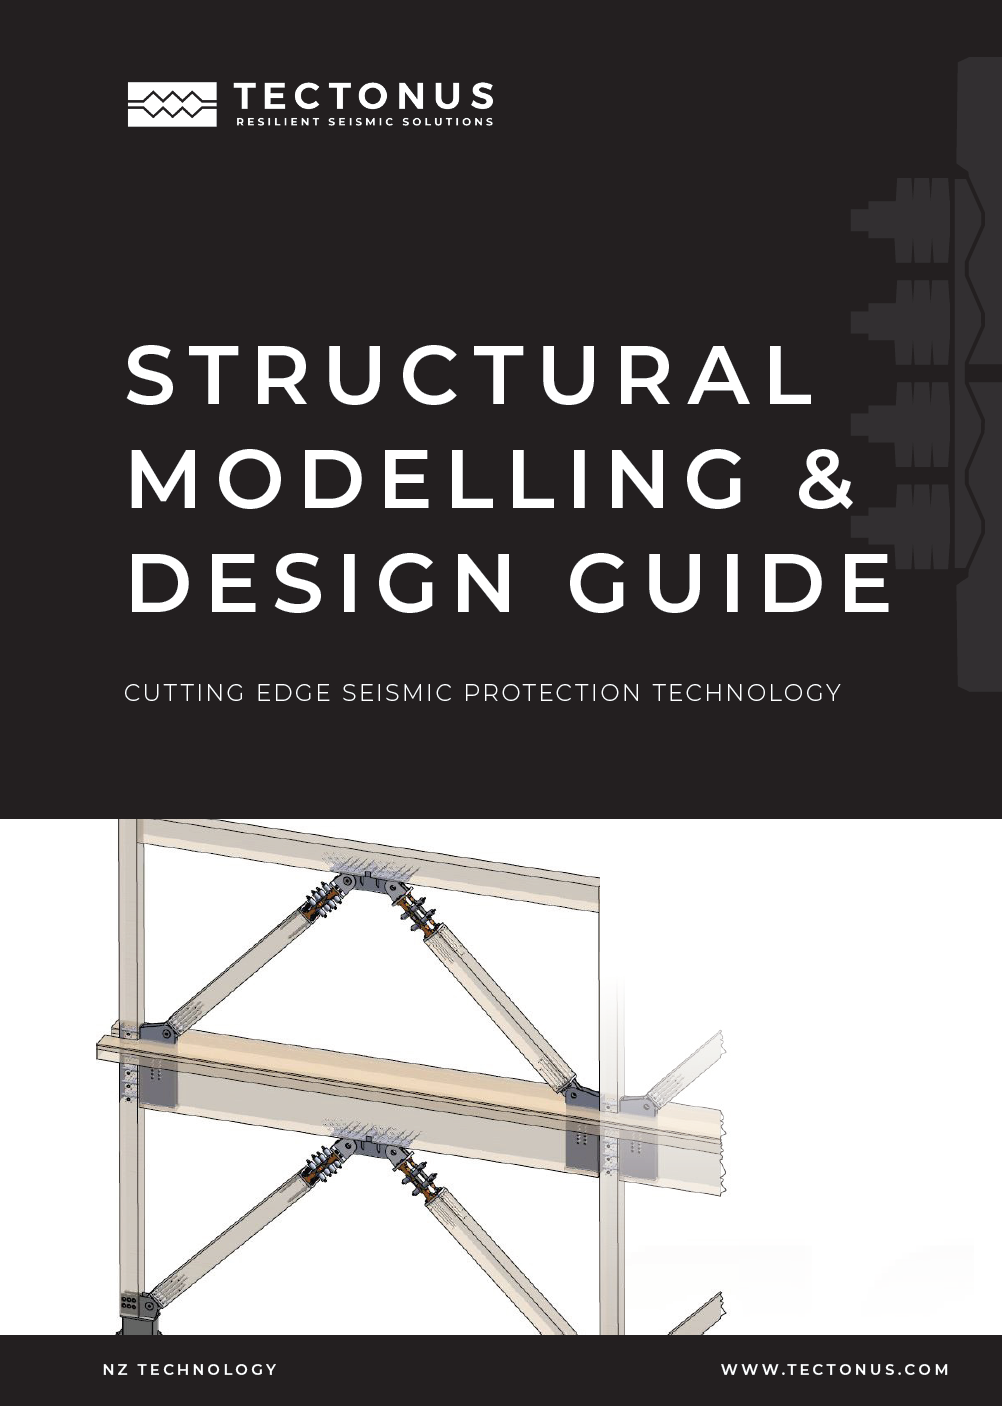 Tectonus structural modelling front cover